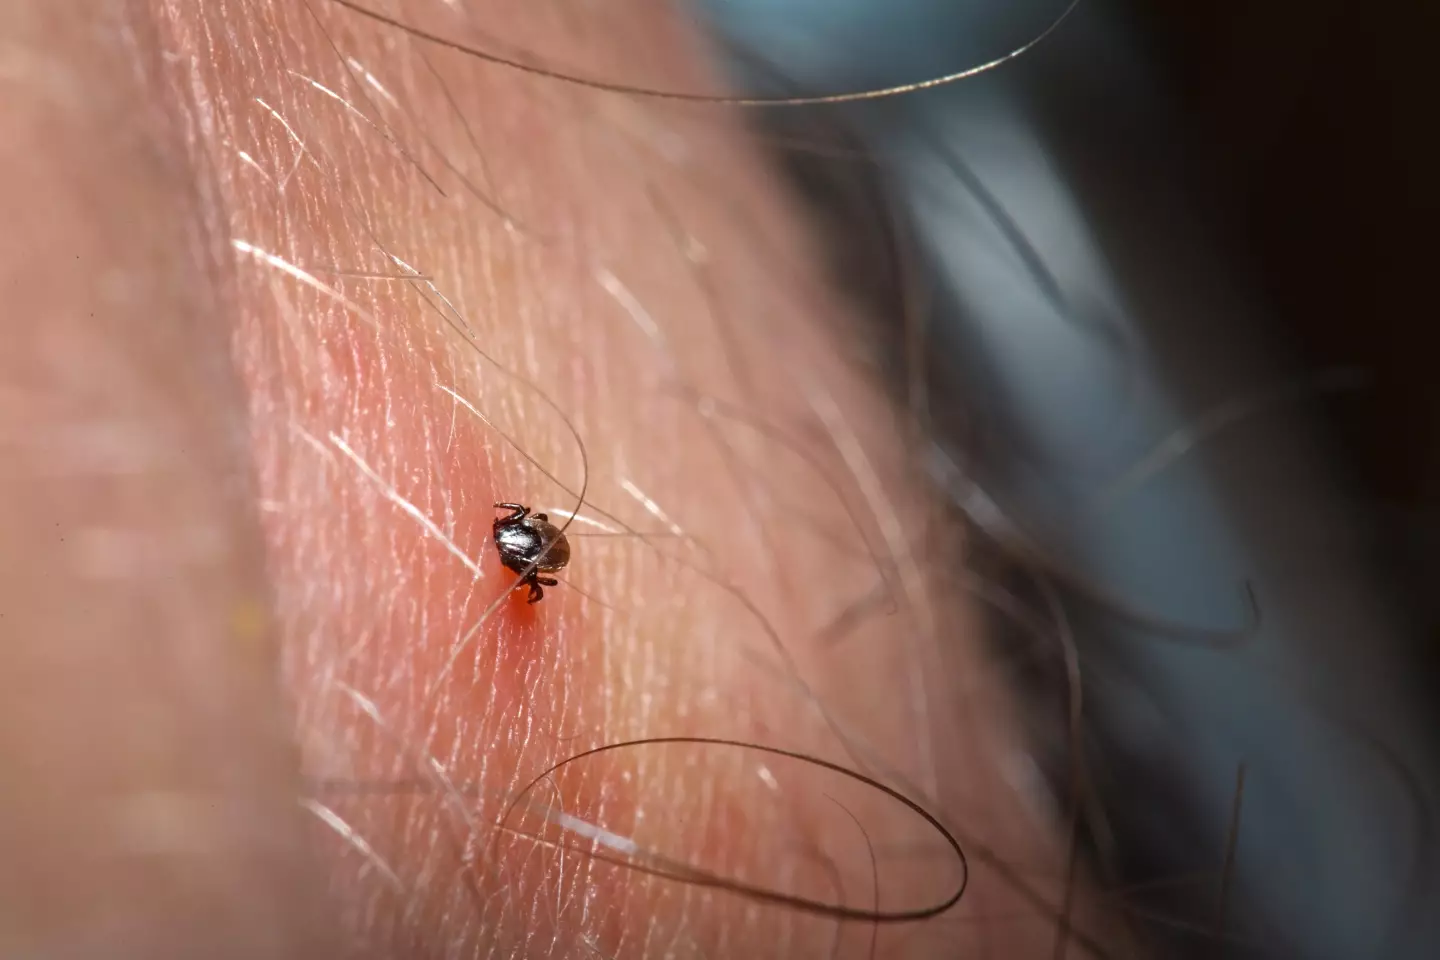 Lyme disease is passed to humans when bitten by an infected tick.